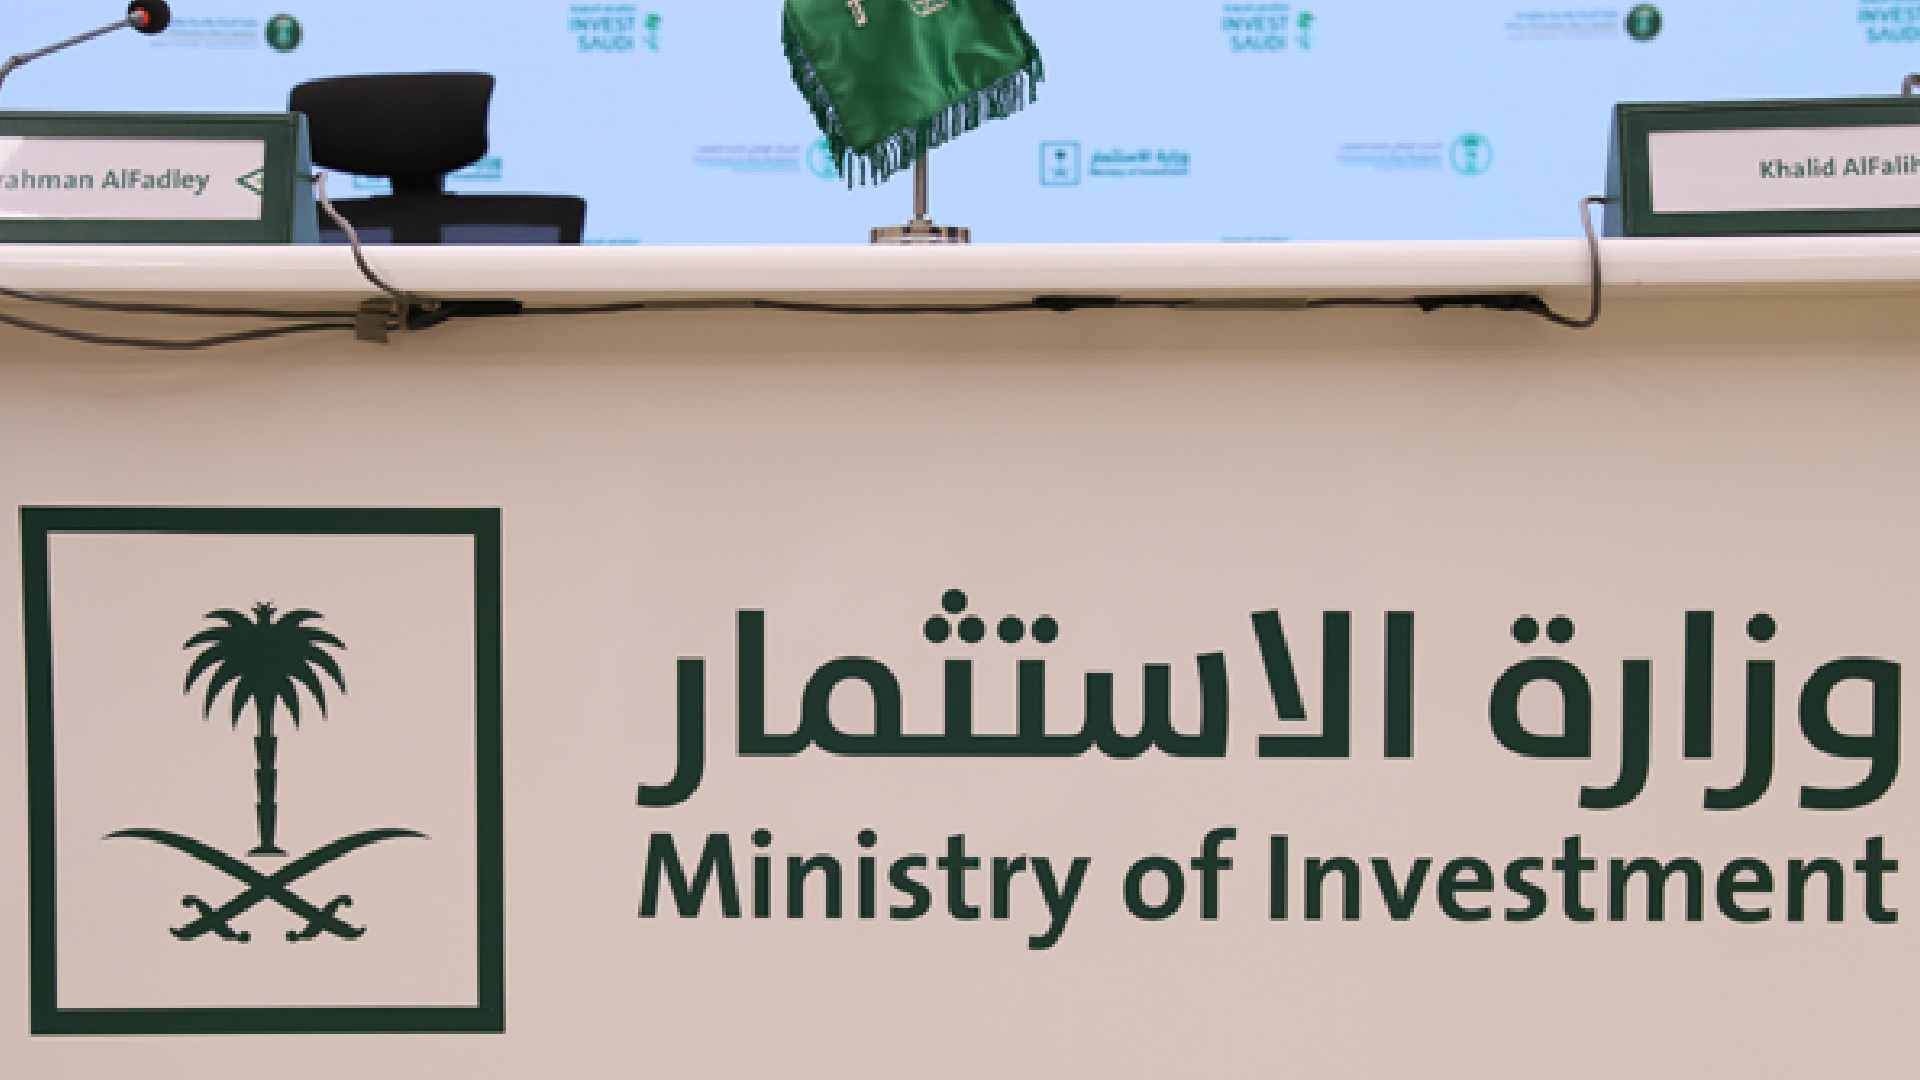 Ministry of Investment Saudi Arabia 